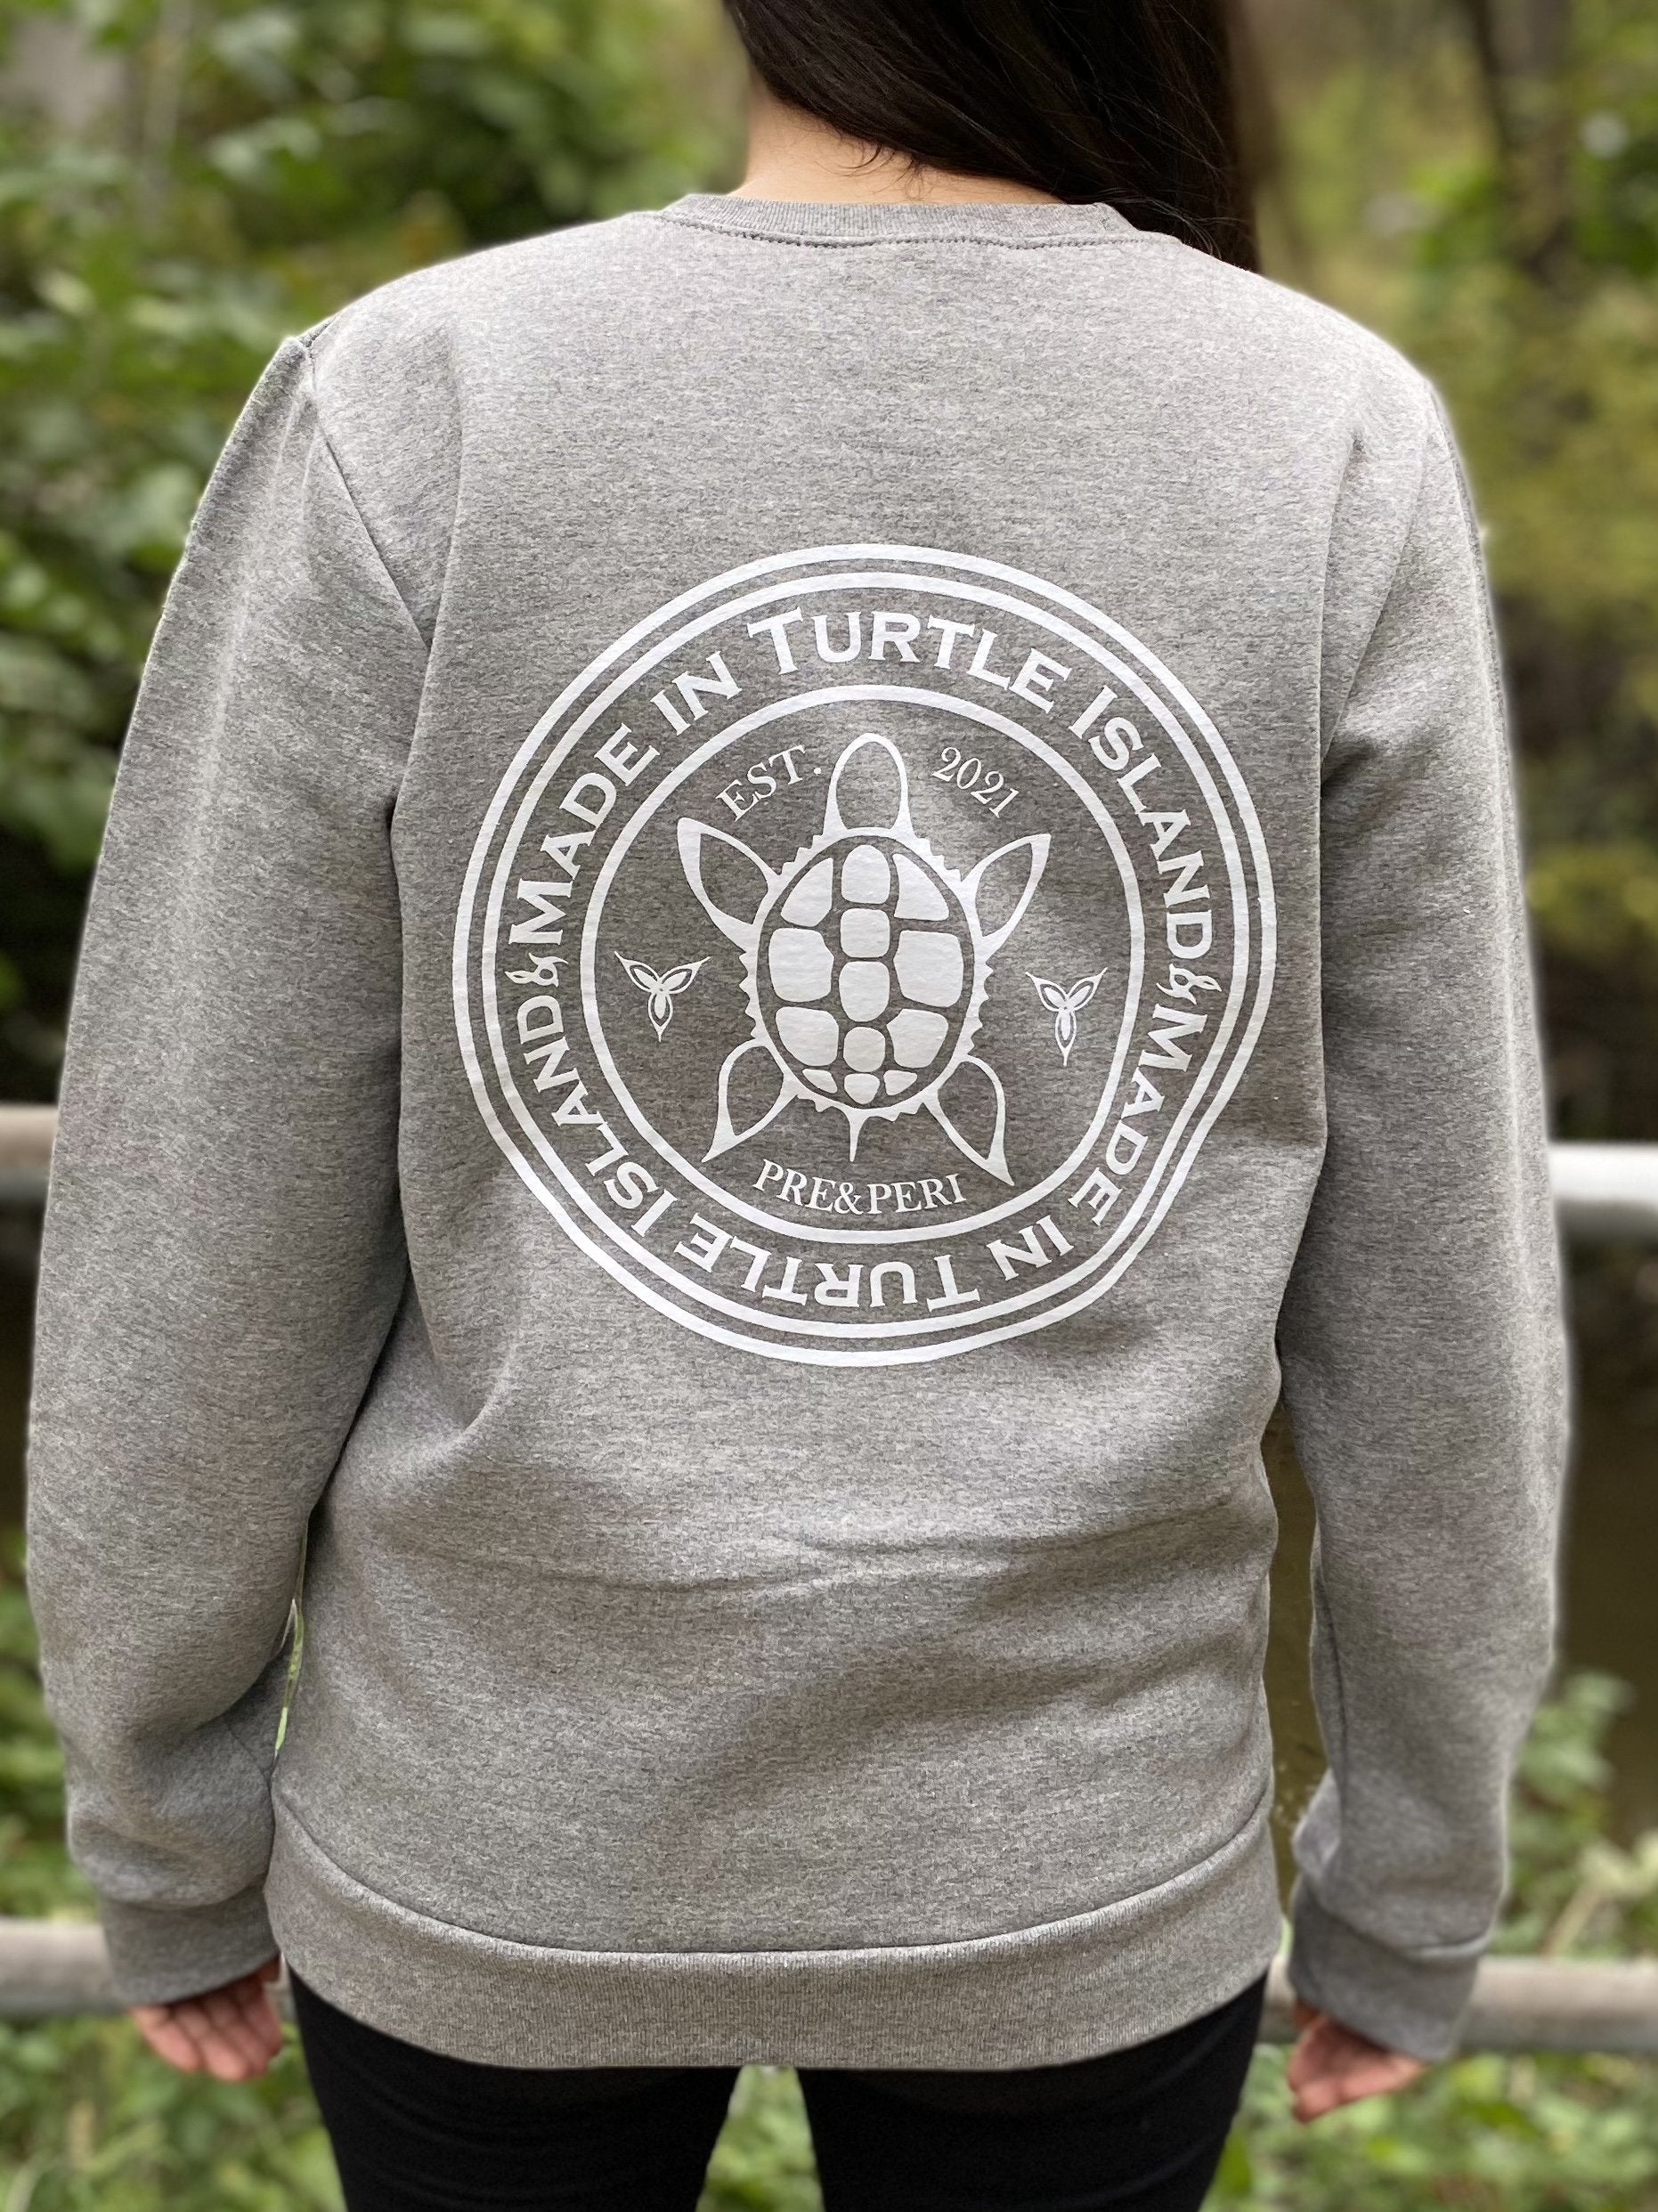 Back of a grey heather sweatshirt on a woman with a white print of a turtle in the centre of a circle with words "Made in Turtle Island" around it twice